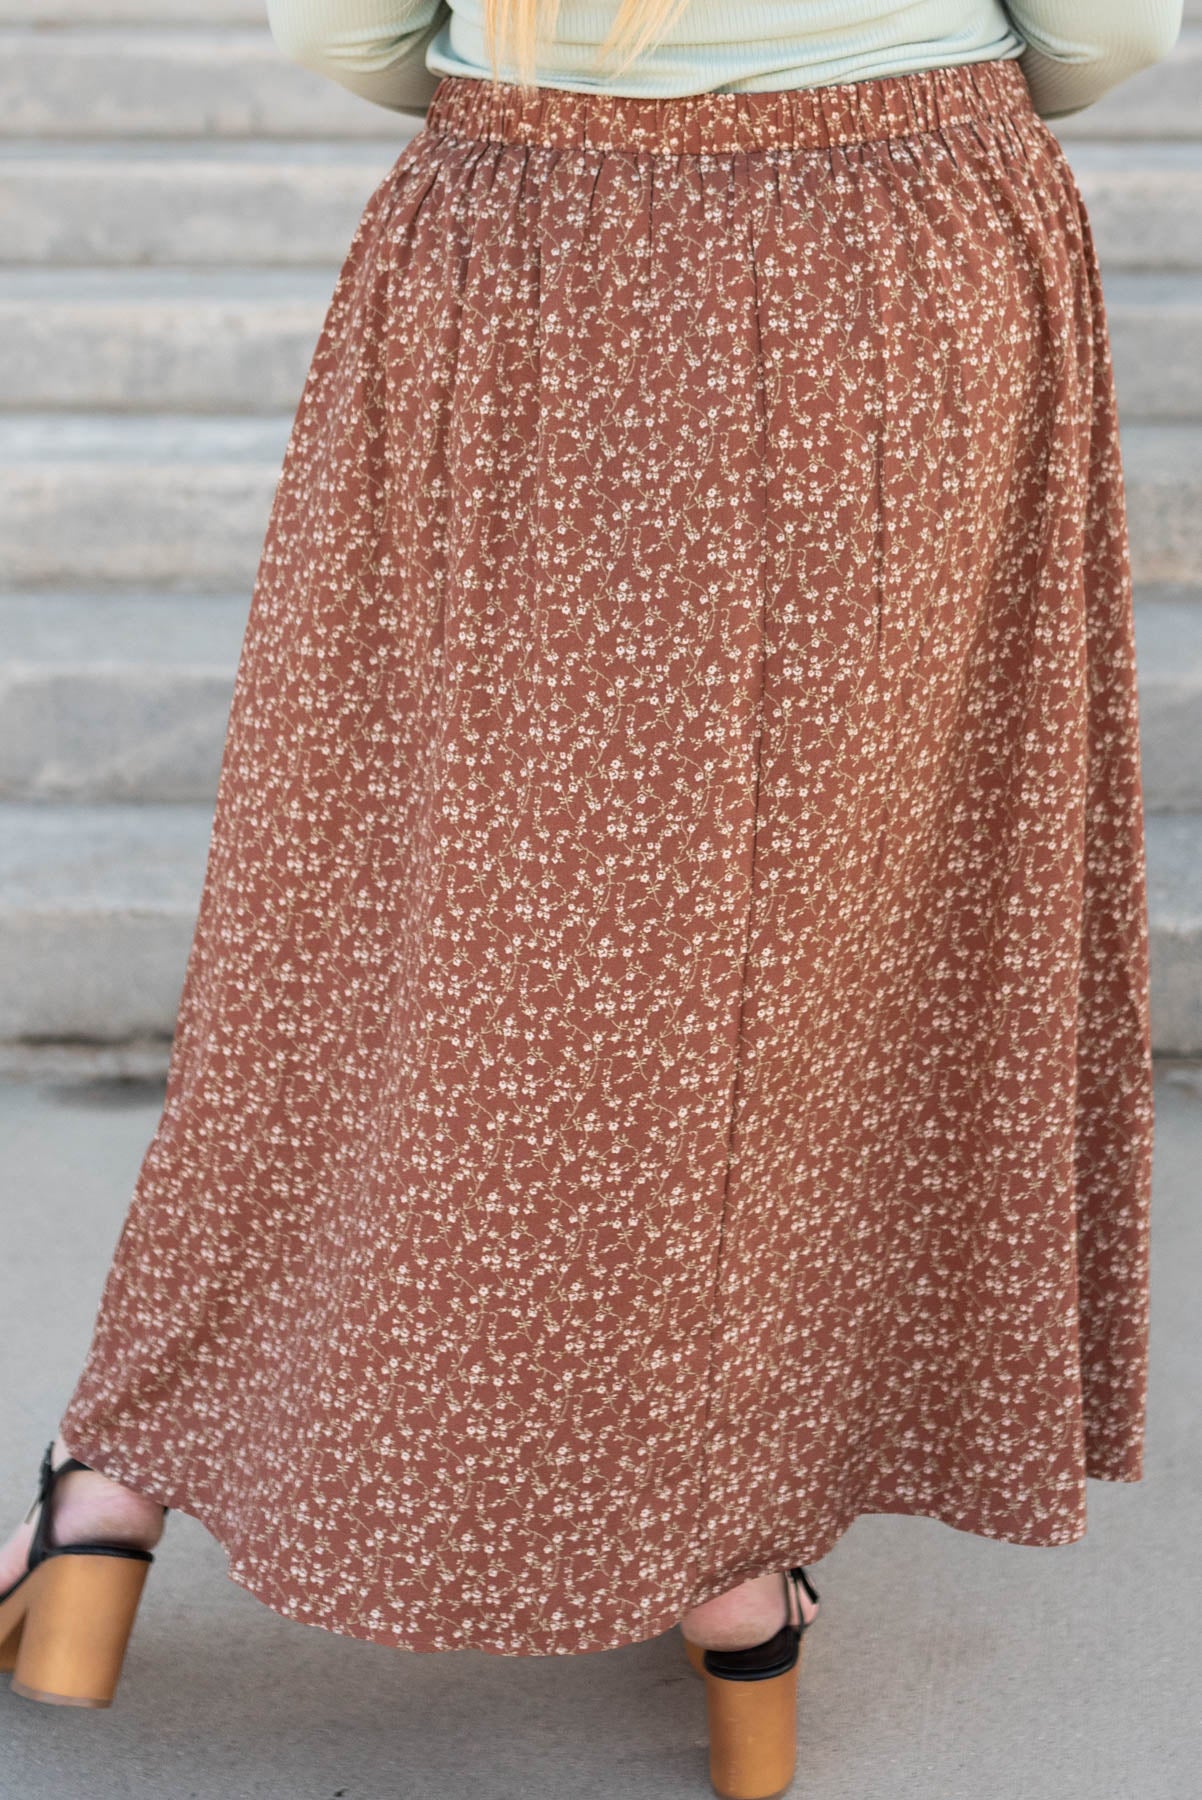 Back view of the plus size chestnut floral skirt